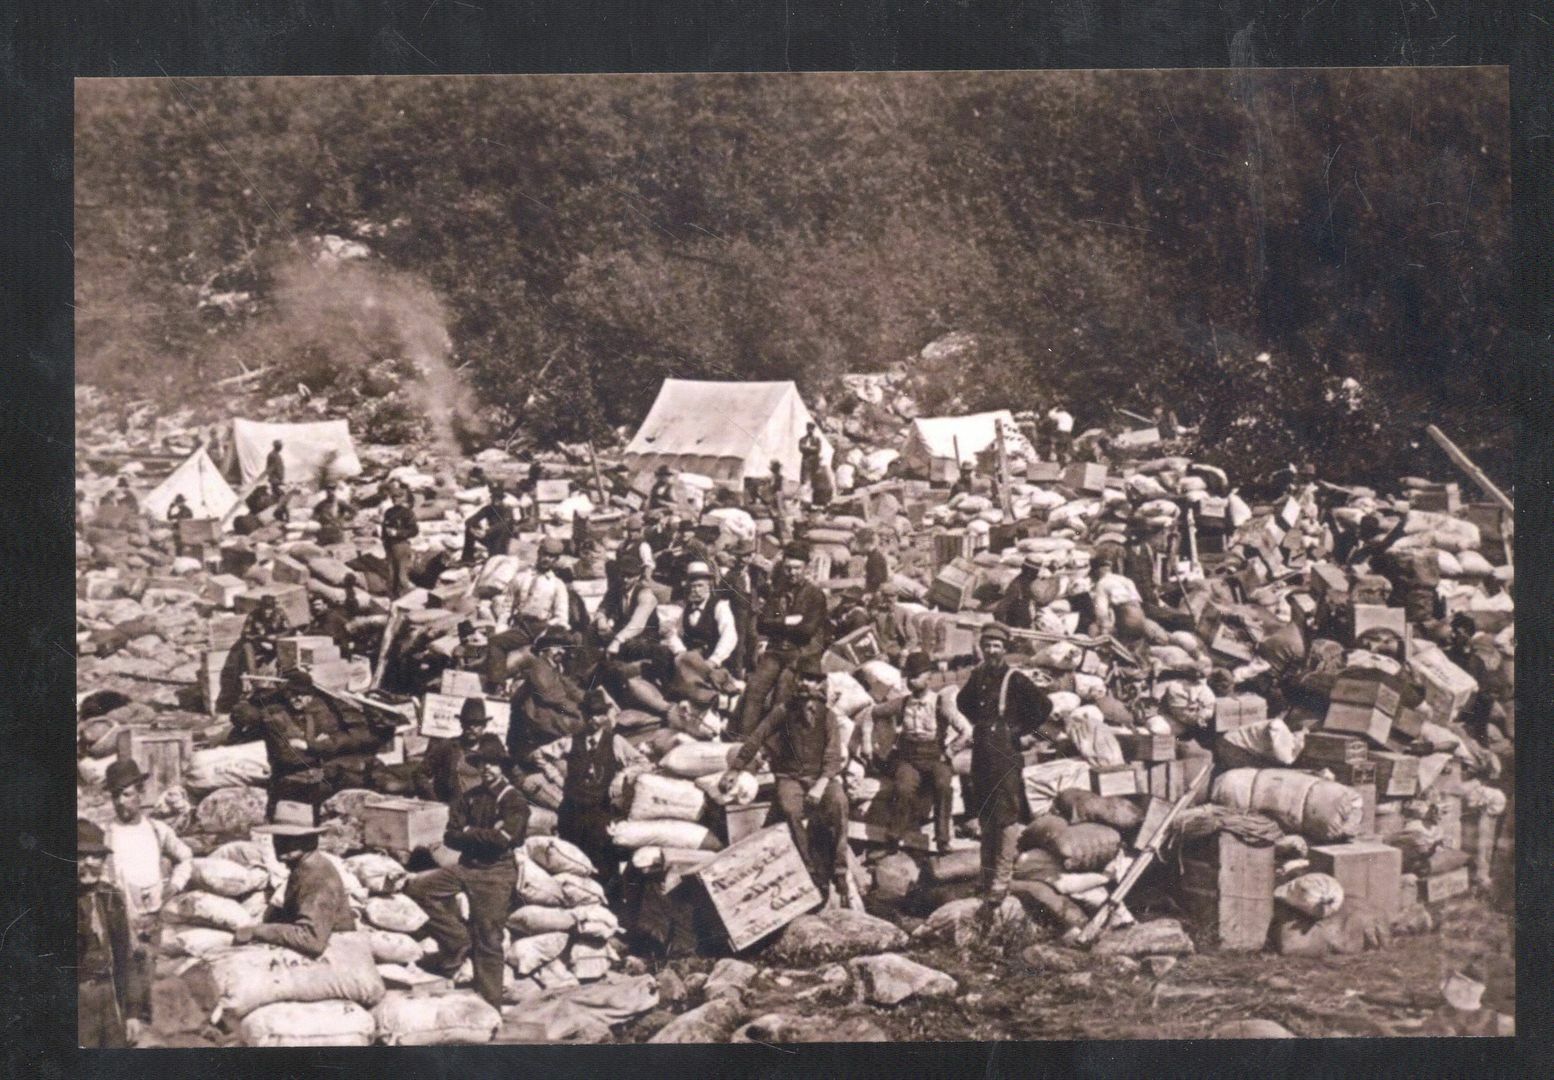 REAL PHOTO DYEA ALASKA GOLD RUSH CROWDED MINERS MIGRATING POSTCARD COPY